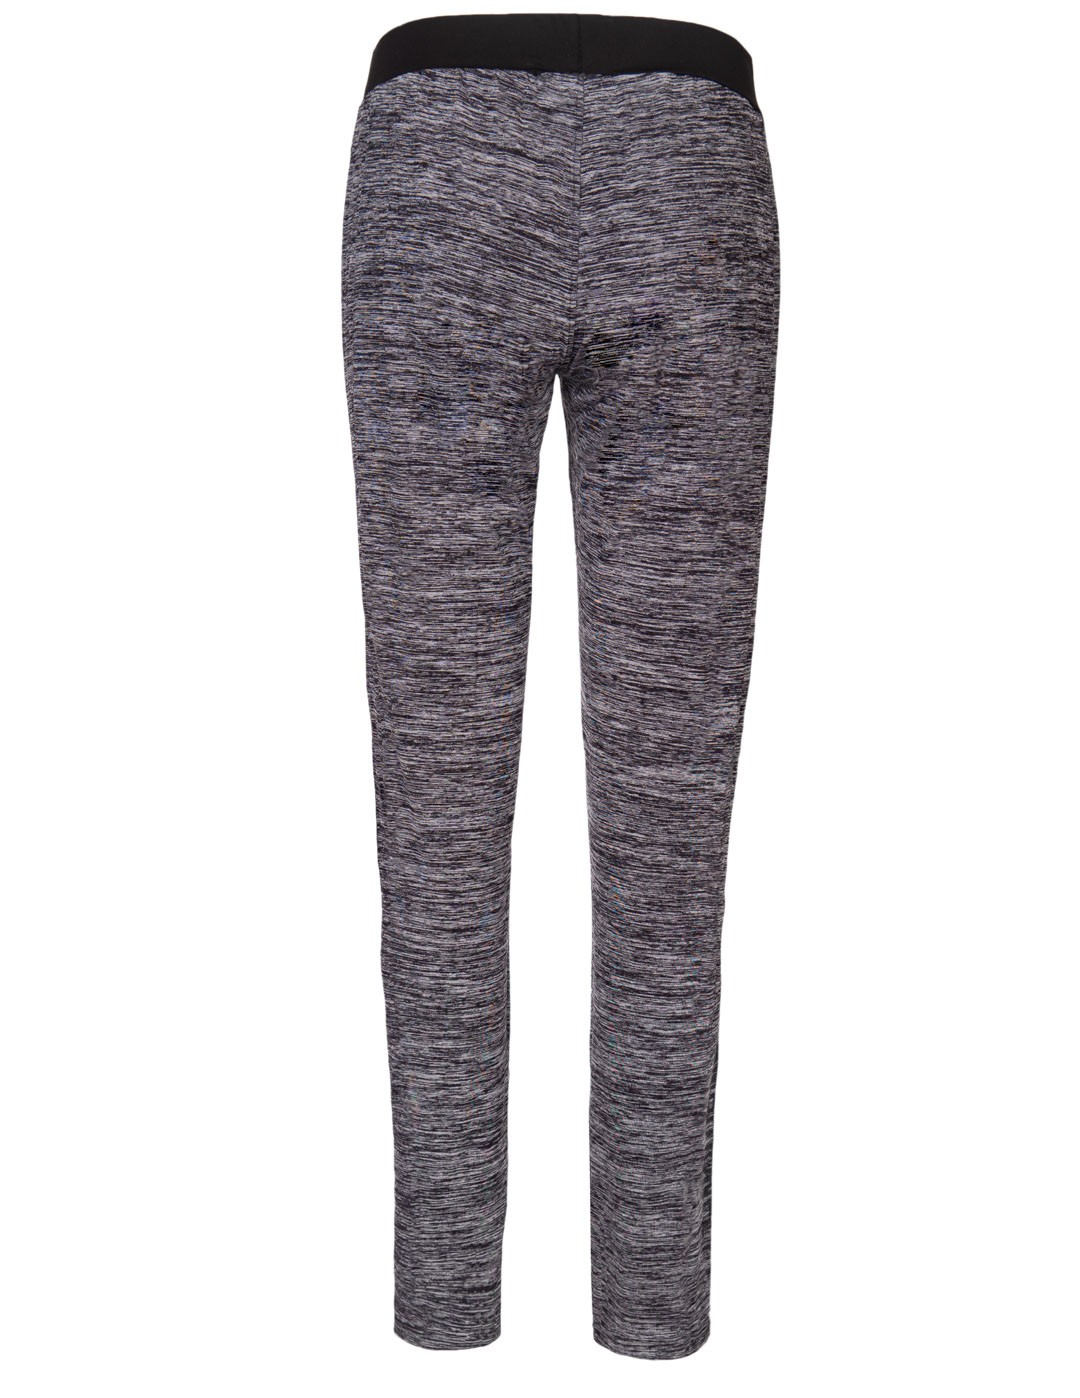 Leggins SPORT IS YOUR GANG Function Sport Silver